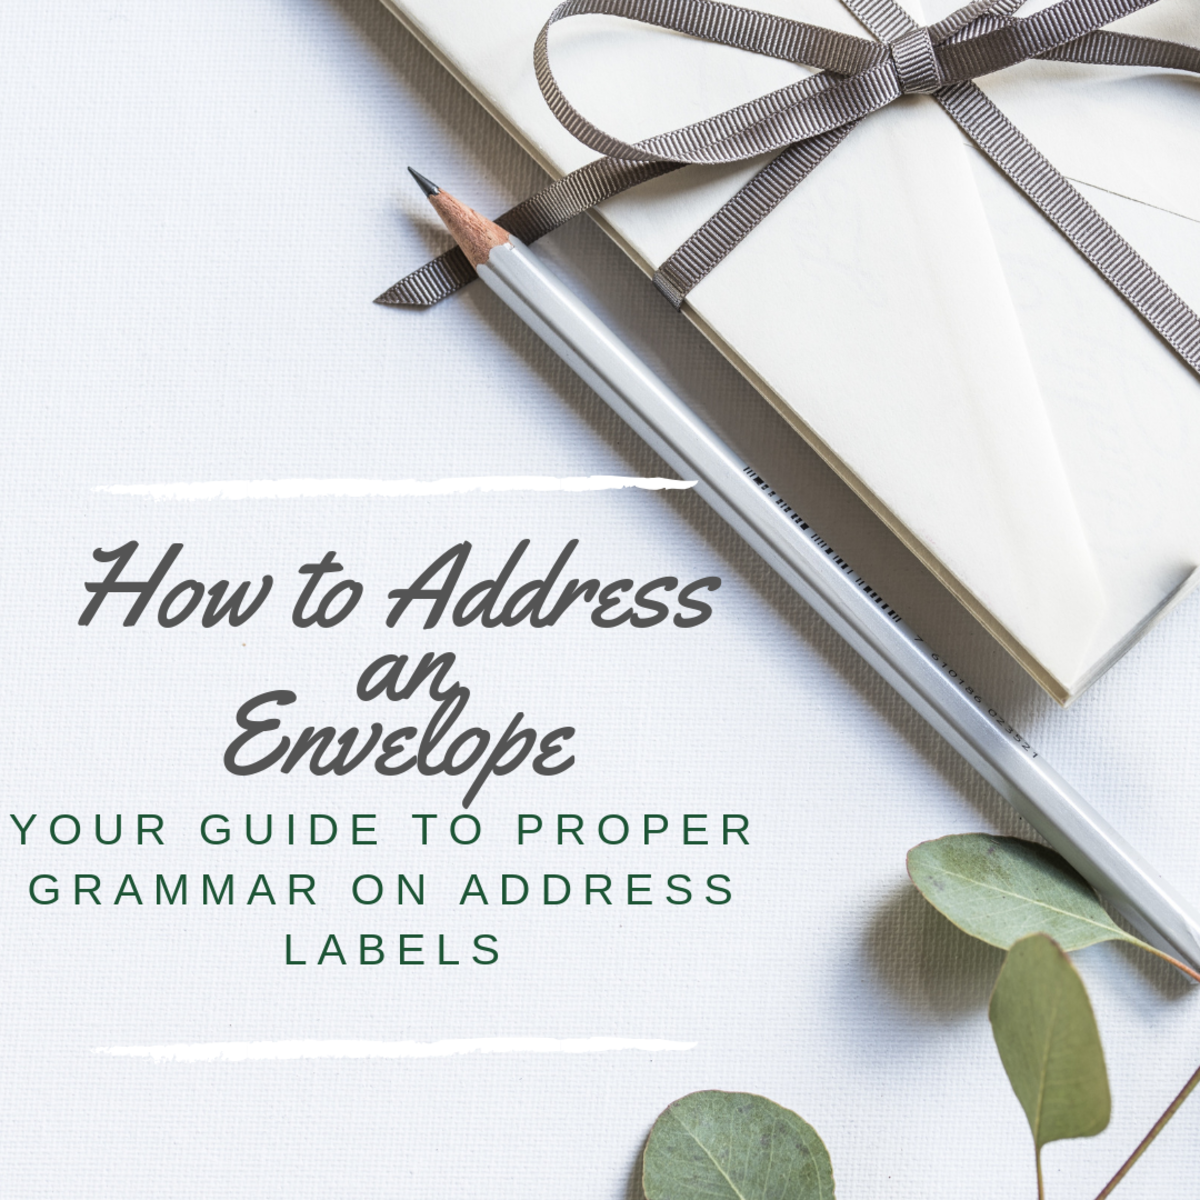 Learn how to address envelopes with proper grammar, and make sure you follow the U.S. Postal Service's guidelines.